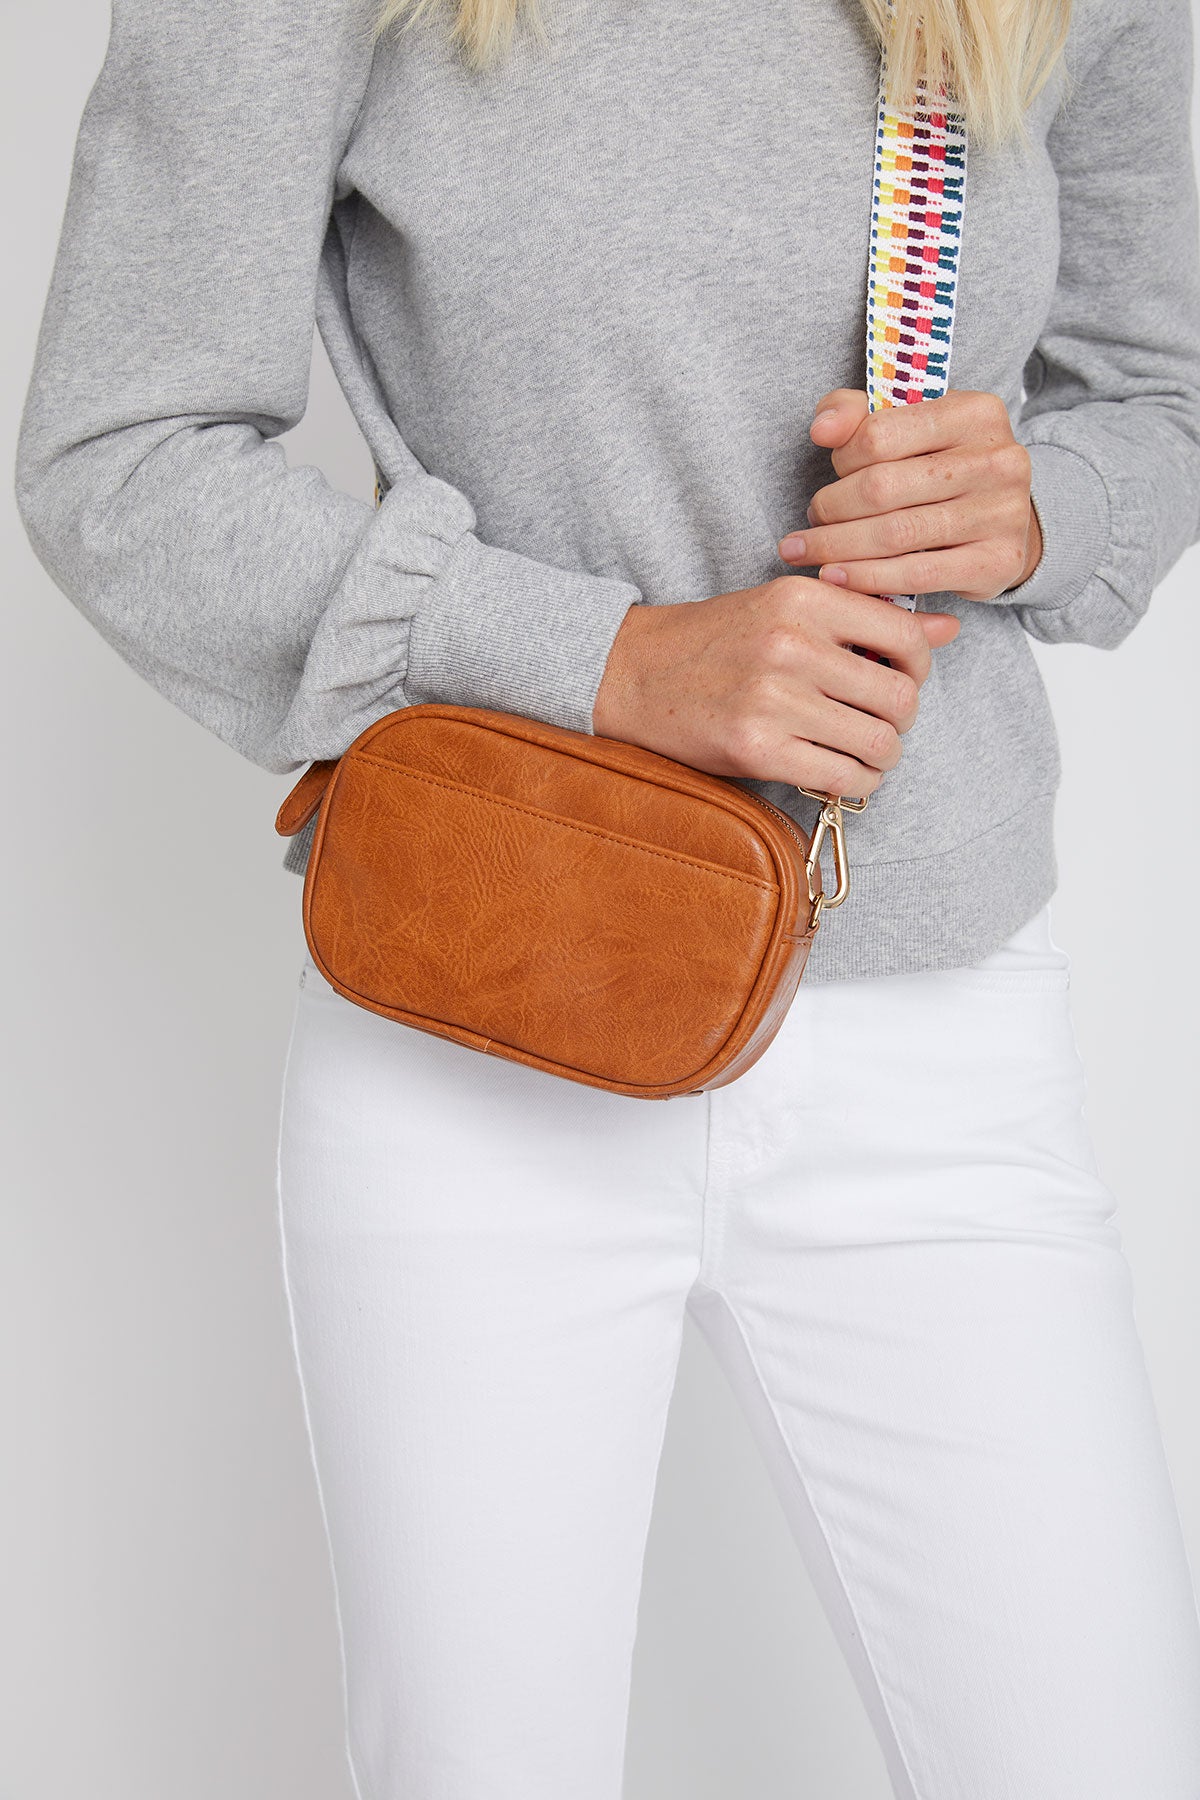 Social Threads Vegan Leather Camera Bag | Camel | Size One Size